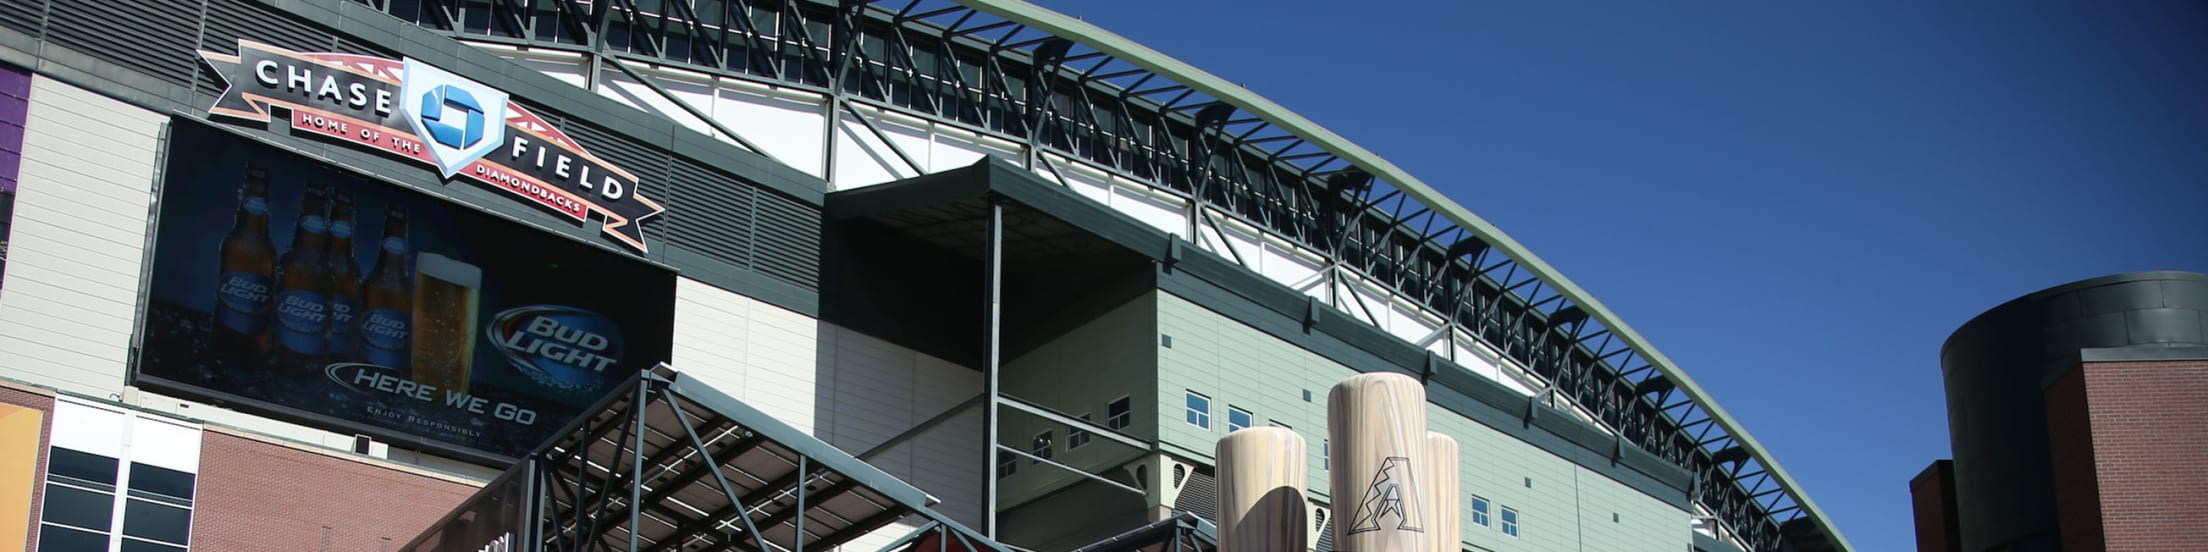 Chase Field Information Guide